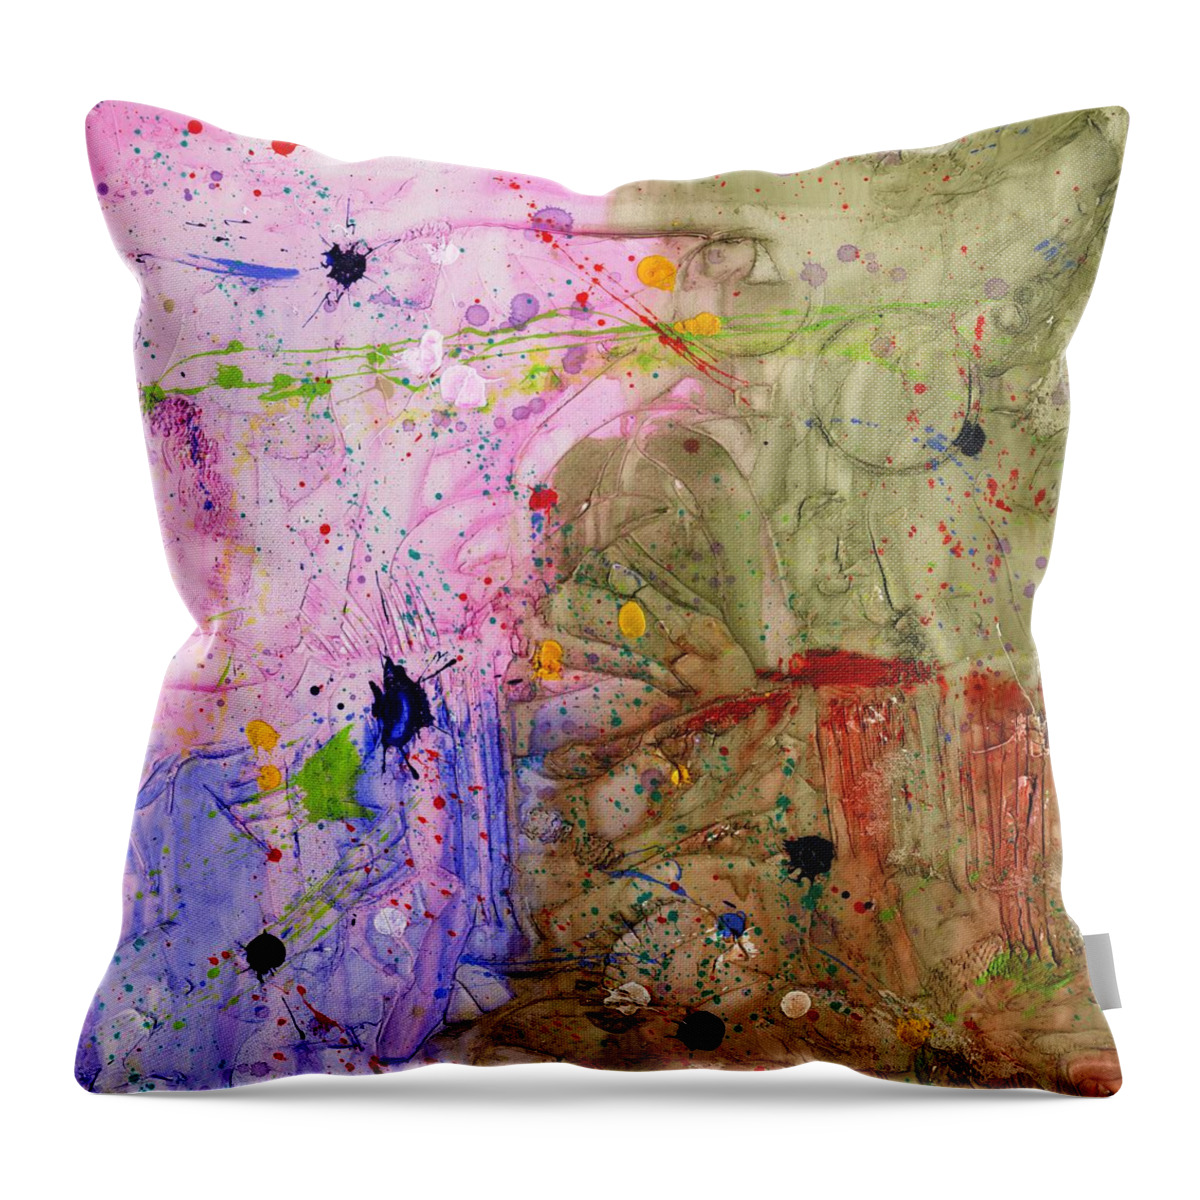 Edge Throw Pillow featuring the painting Outpost by Phil Strang